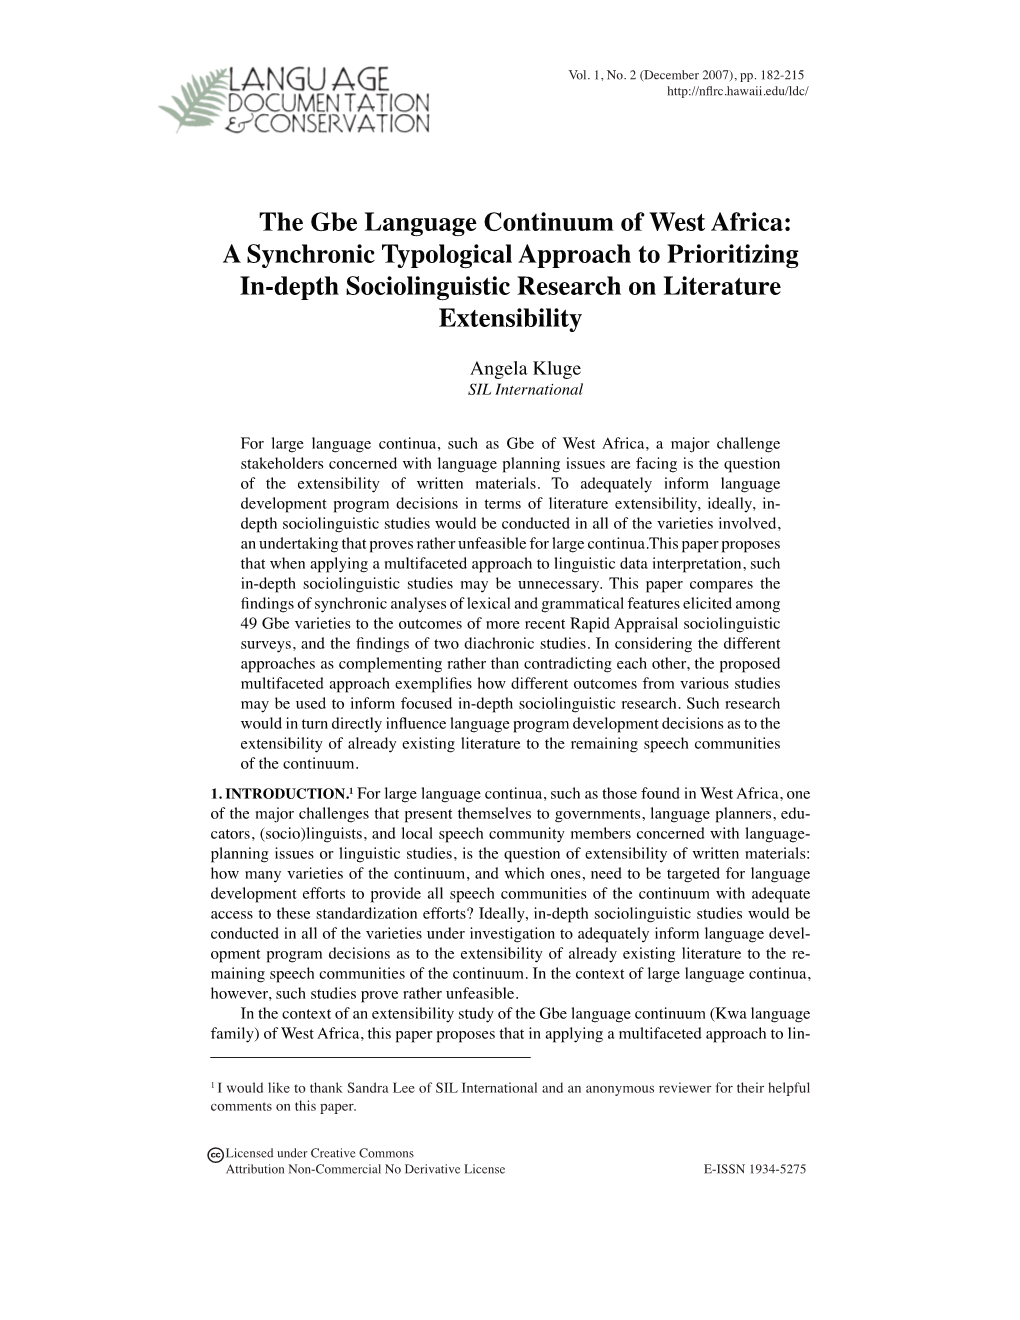 The Gbe Language Continuum of West Africa: a Synchronic Typological Approach to Prioritizing In-Depth Sociolinguistic Research on Literature Extensibility